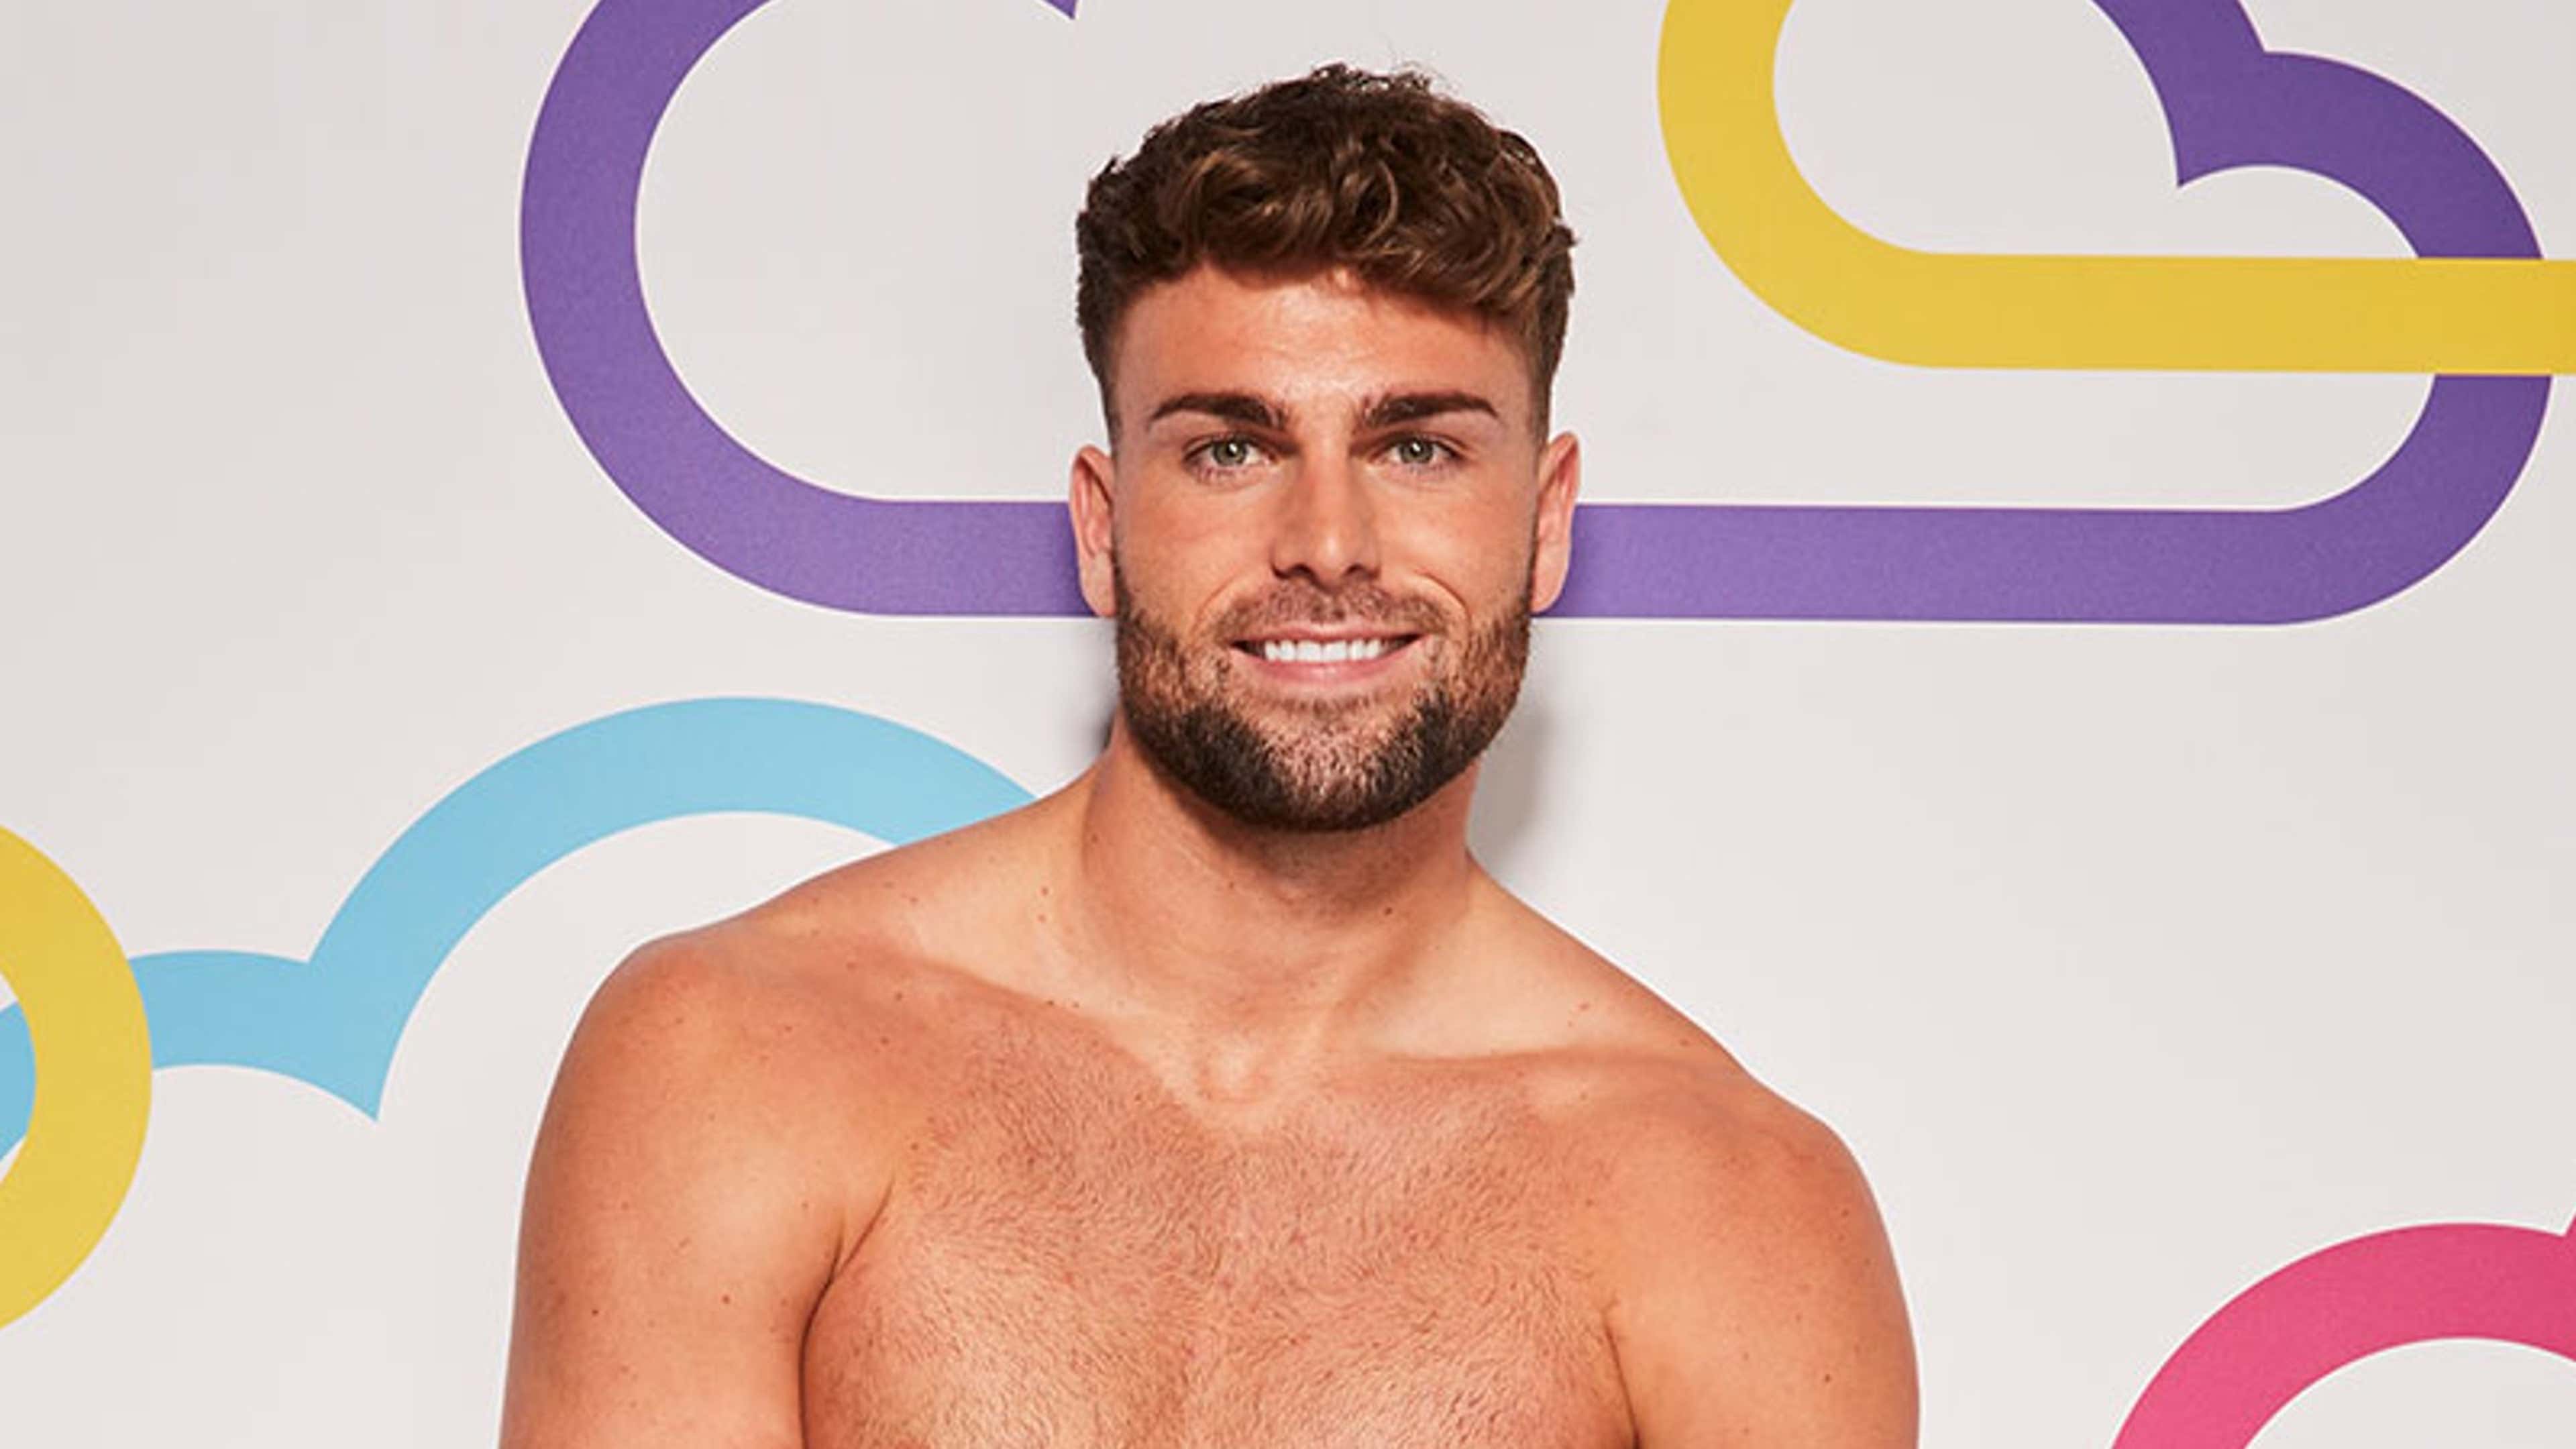 Who is Love Island footballer Tom Clare? Everything you need to know